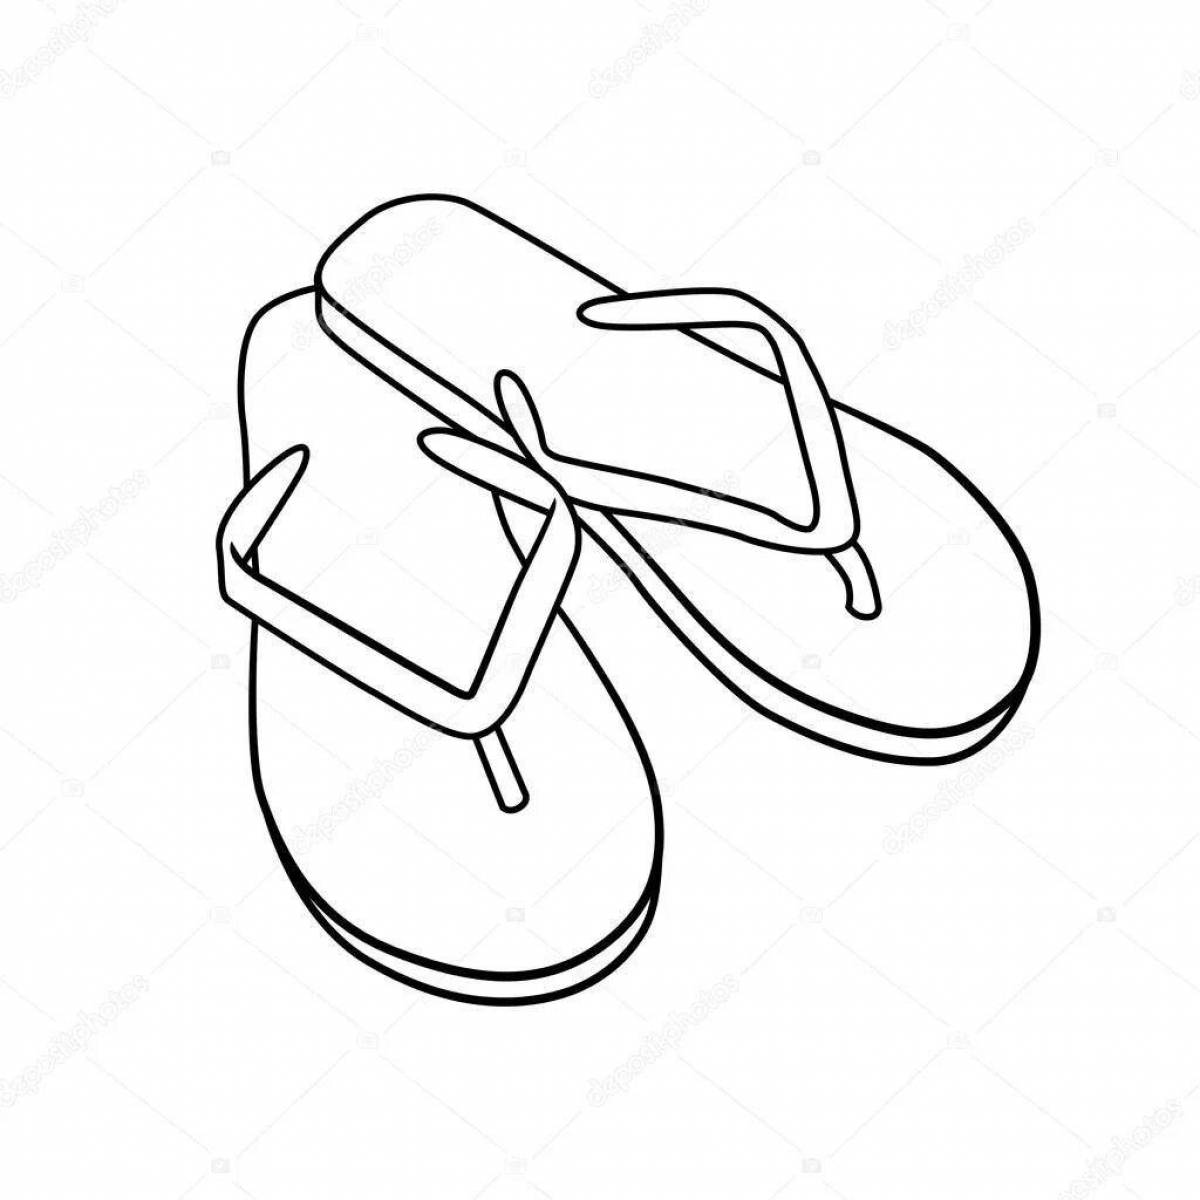 Coloring page joyful slippers for babies